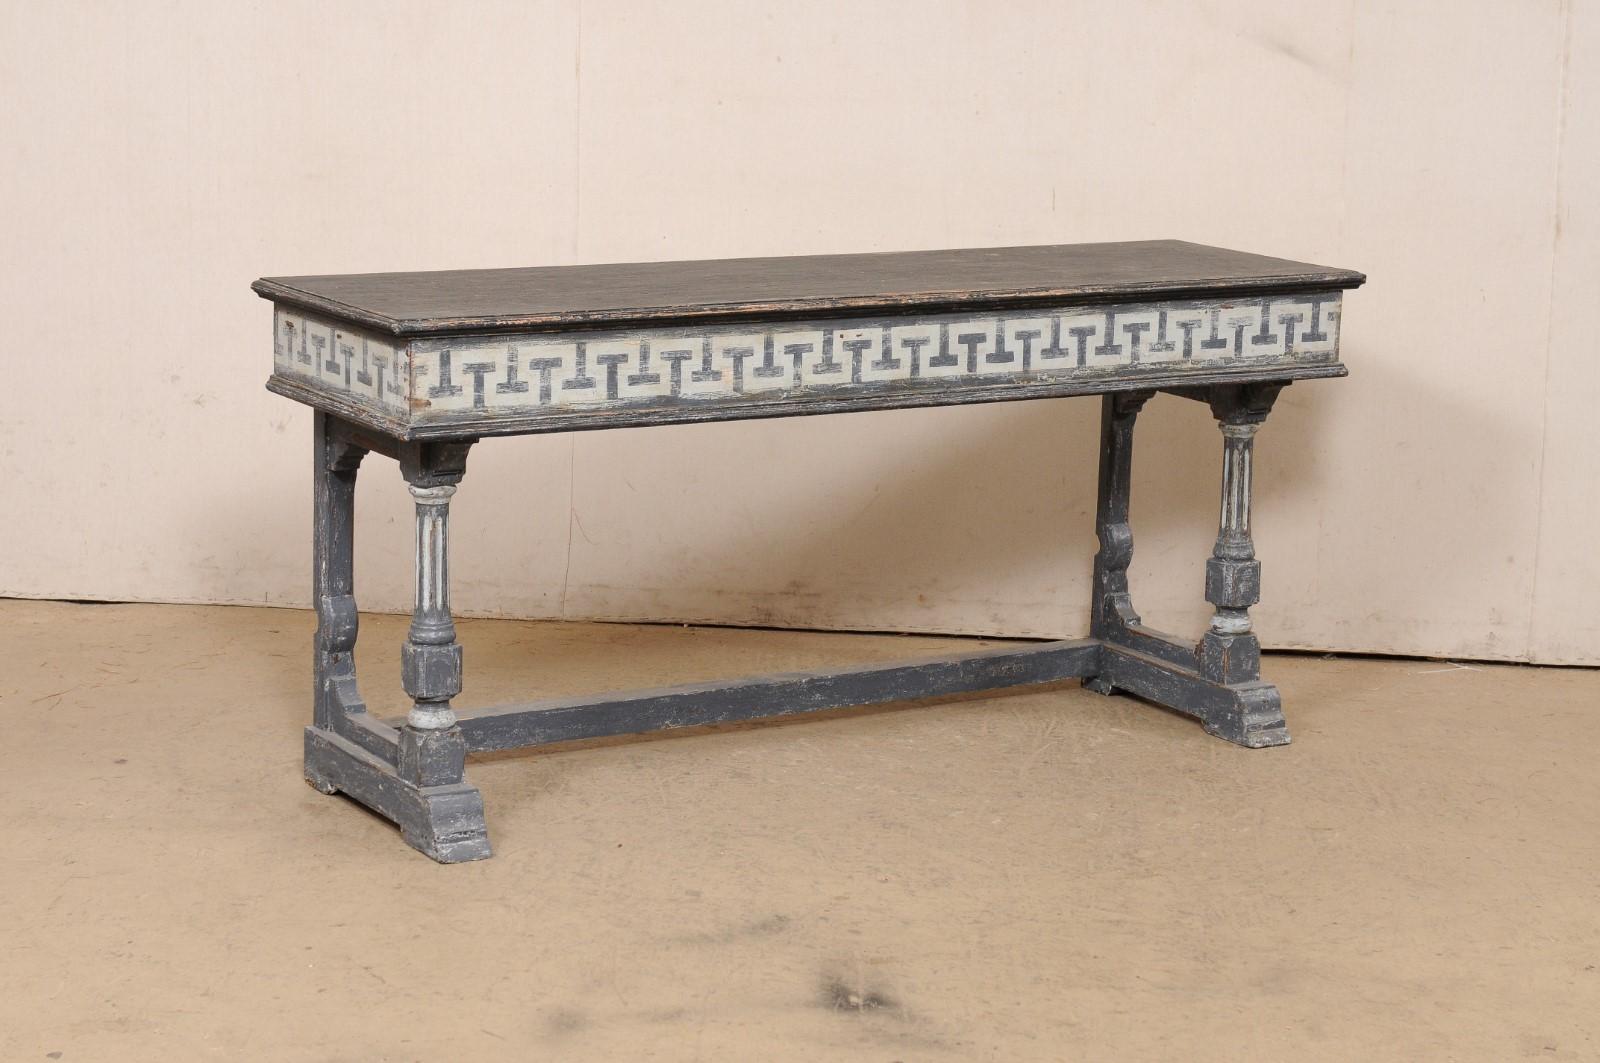 A French console table with painted Greek Key motif. This vintage table from France features a rectangular-shaped top which slightly overhangs the apron below which has been nicely decorated with a hand-painted Greek Key motif across its front and